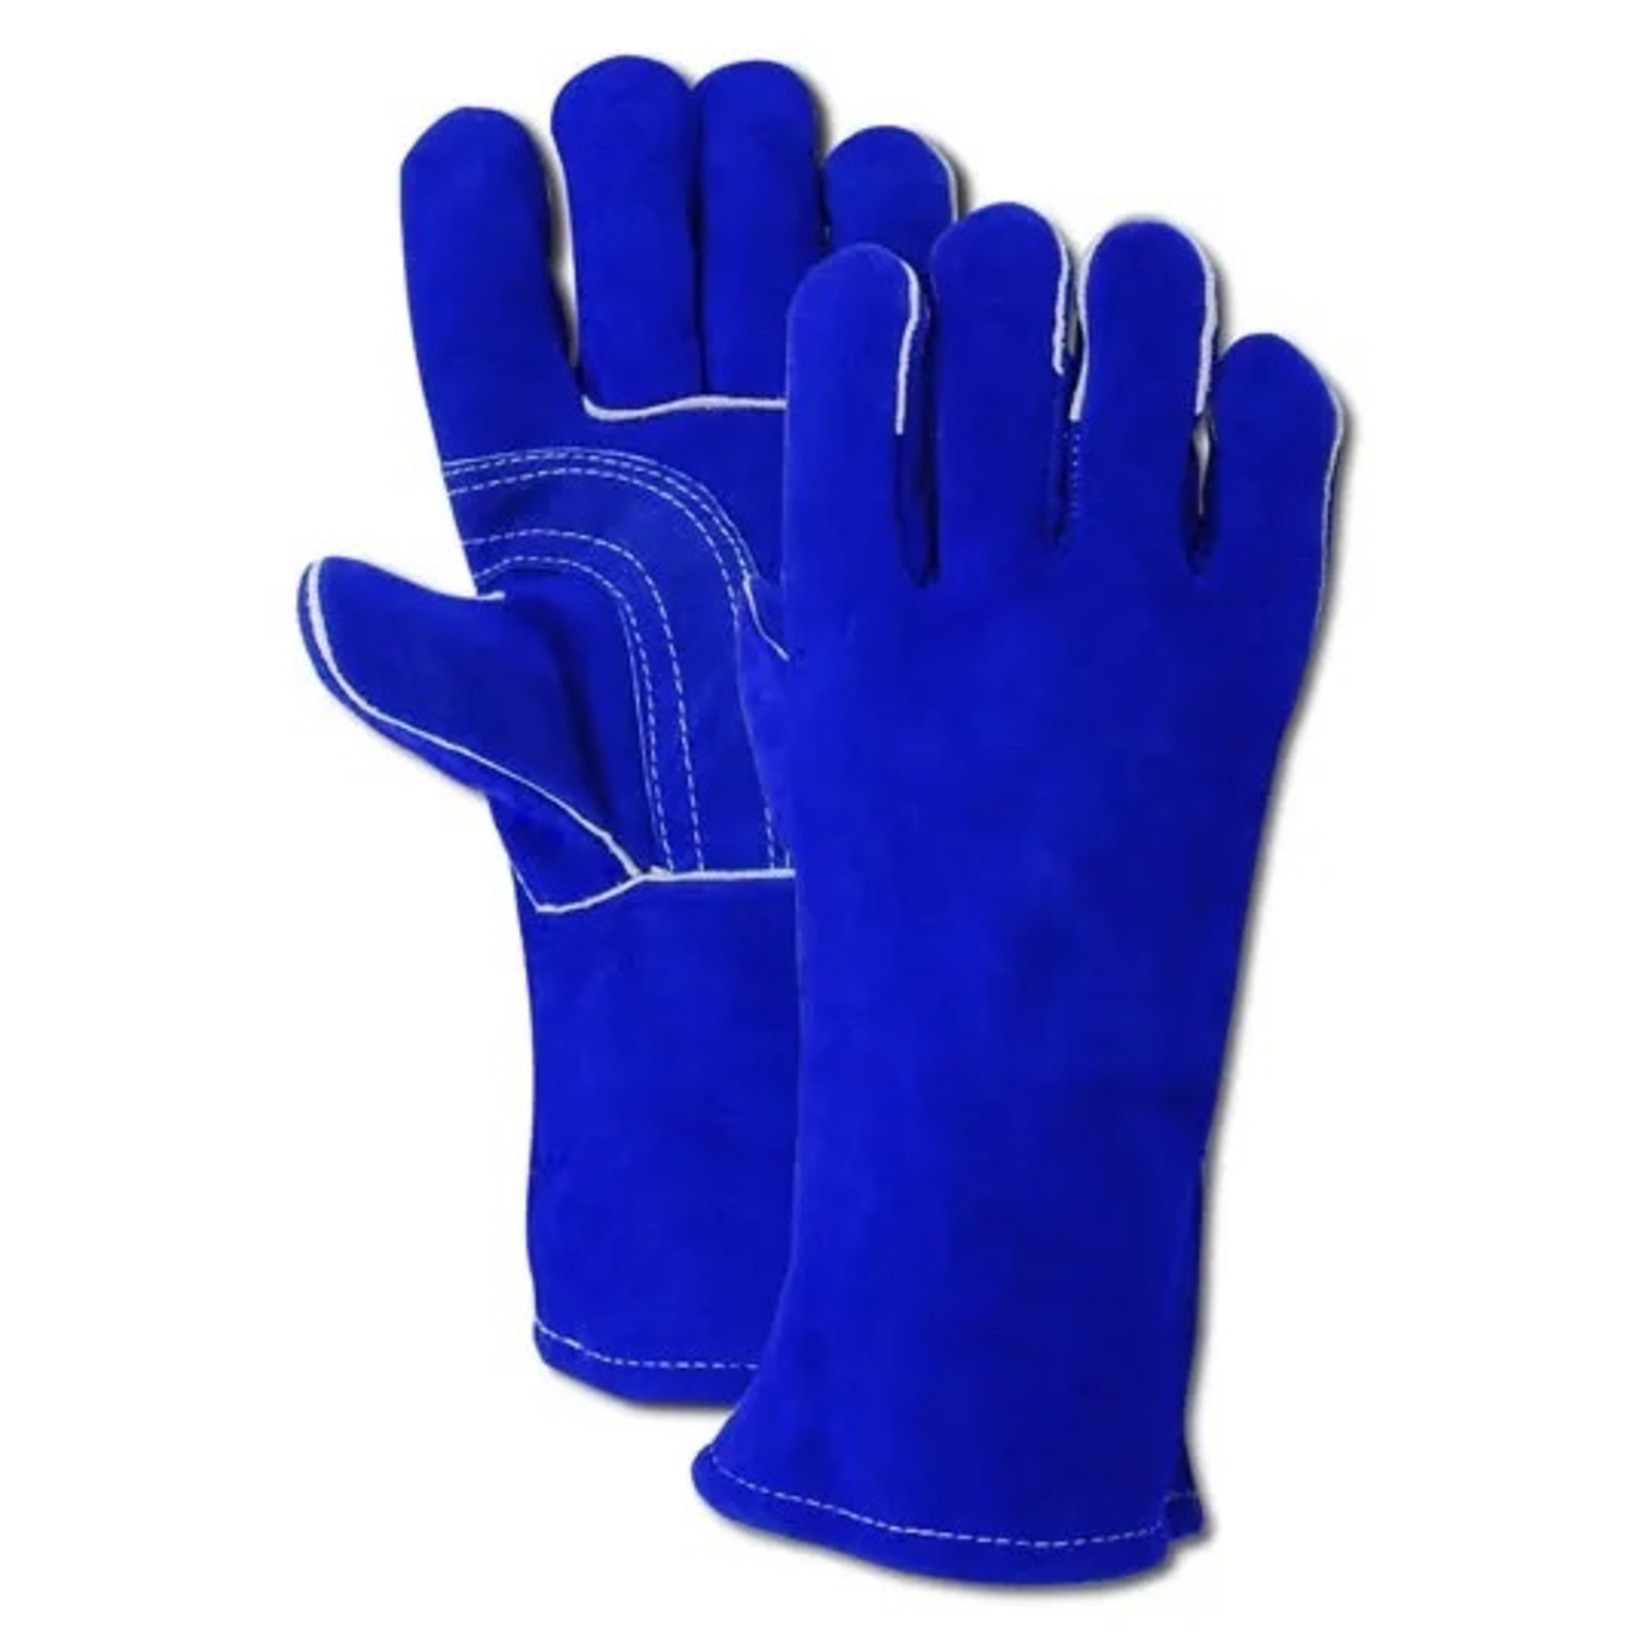 Magid Glove & Safety T6902S/L Side Split Cow Leather Welding Gloves - Size Large (12 Pairs Per Pack)